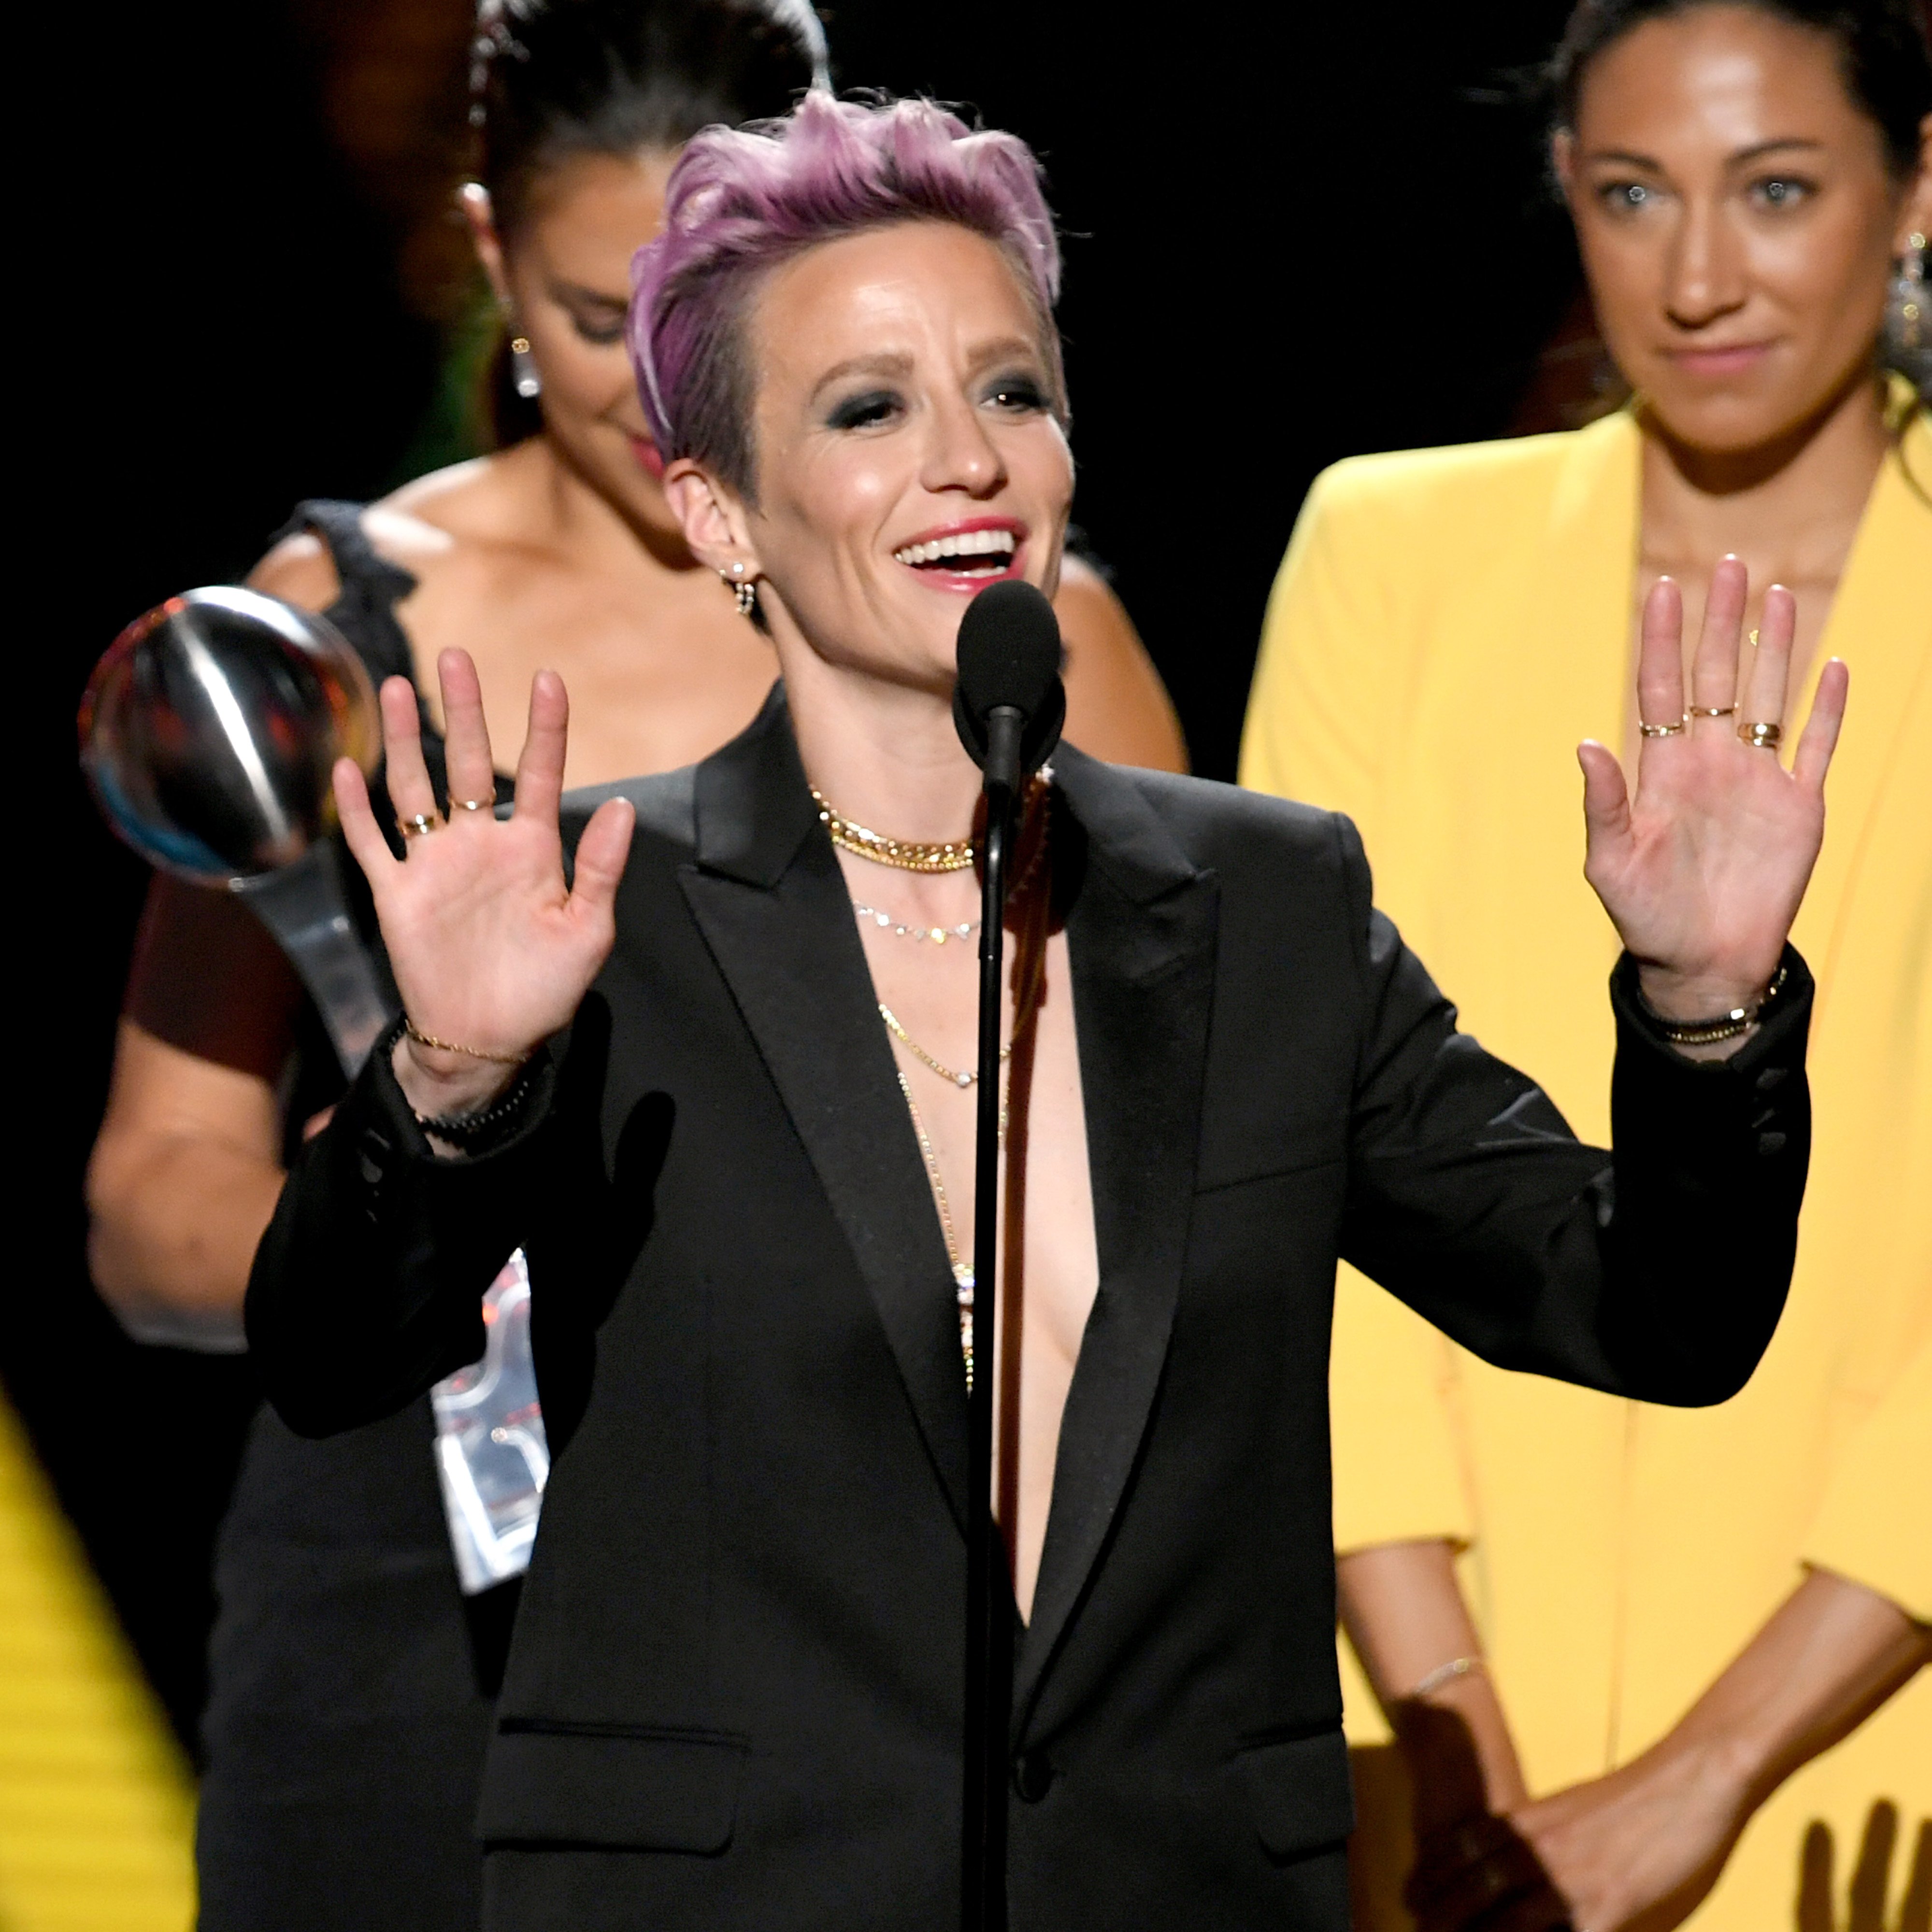 Megan Rapinoe speaks at the Annual ESPY Awards on July 10 2019 | Photo: Getty Images